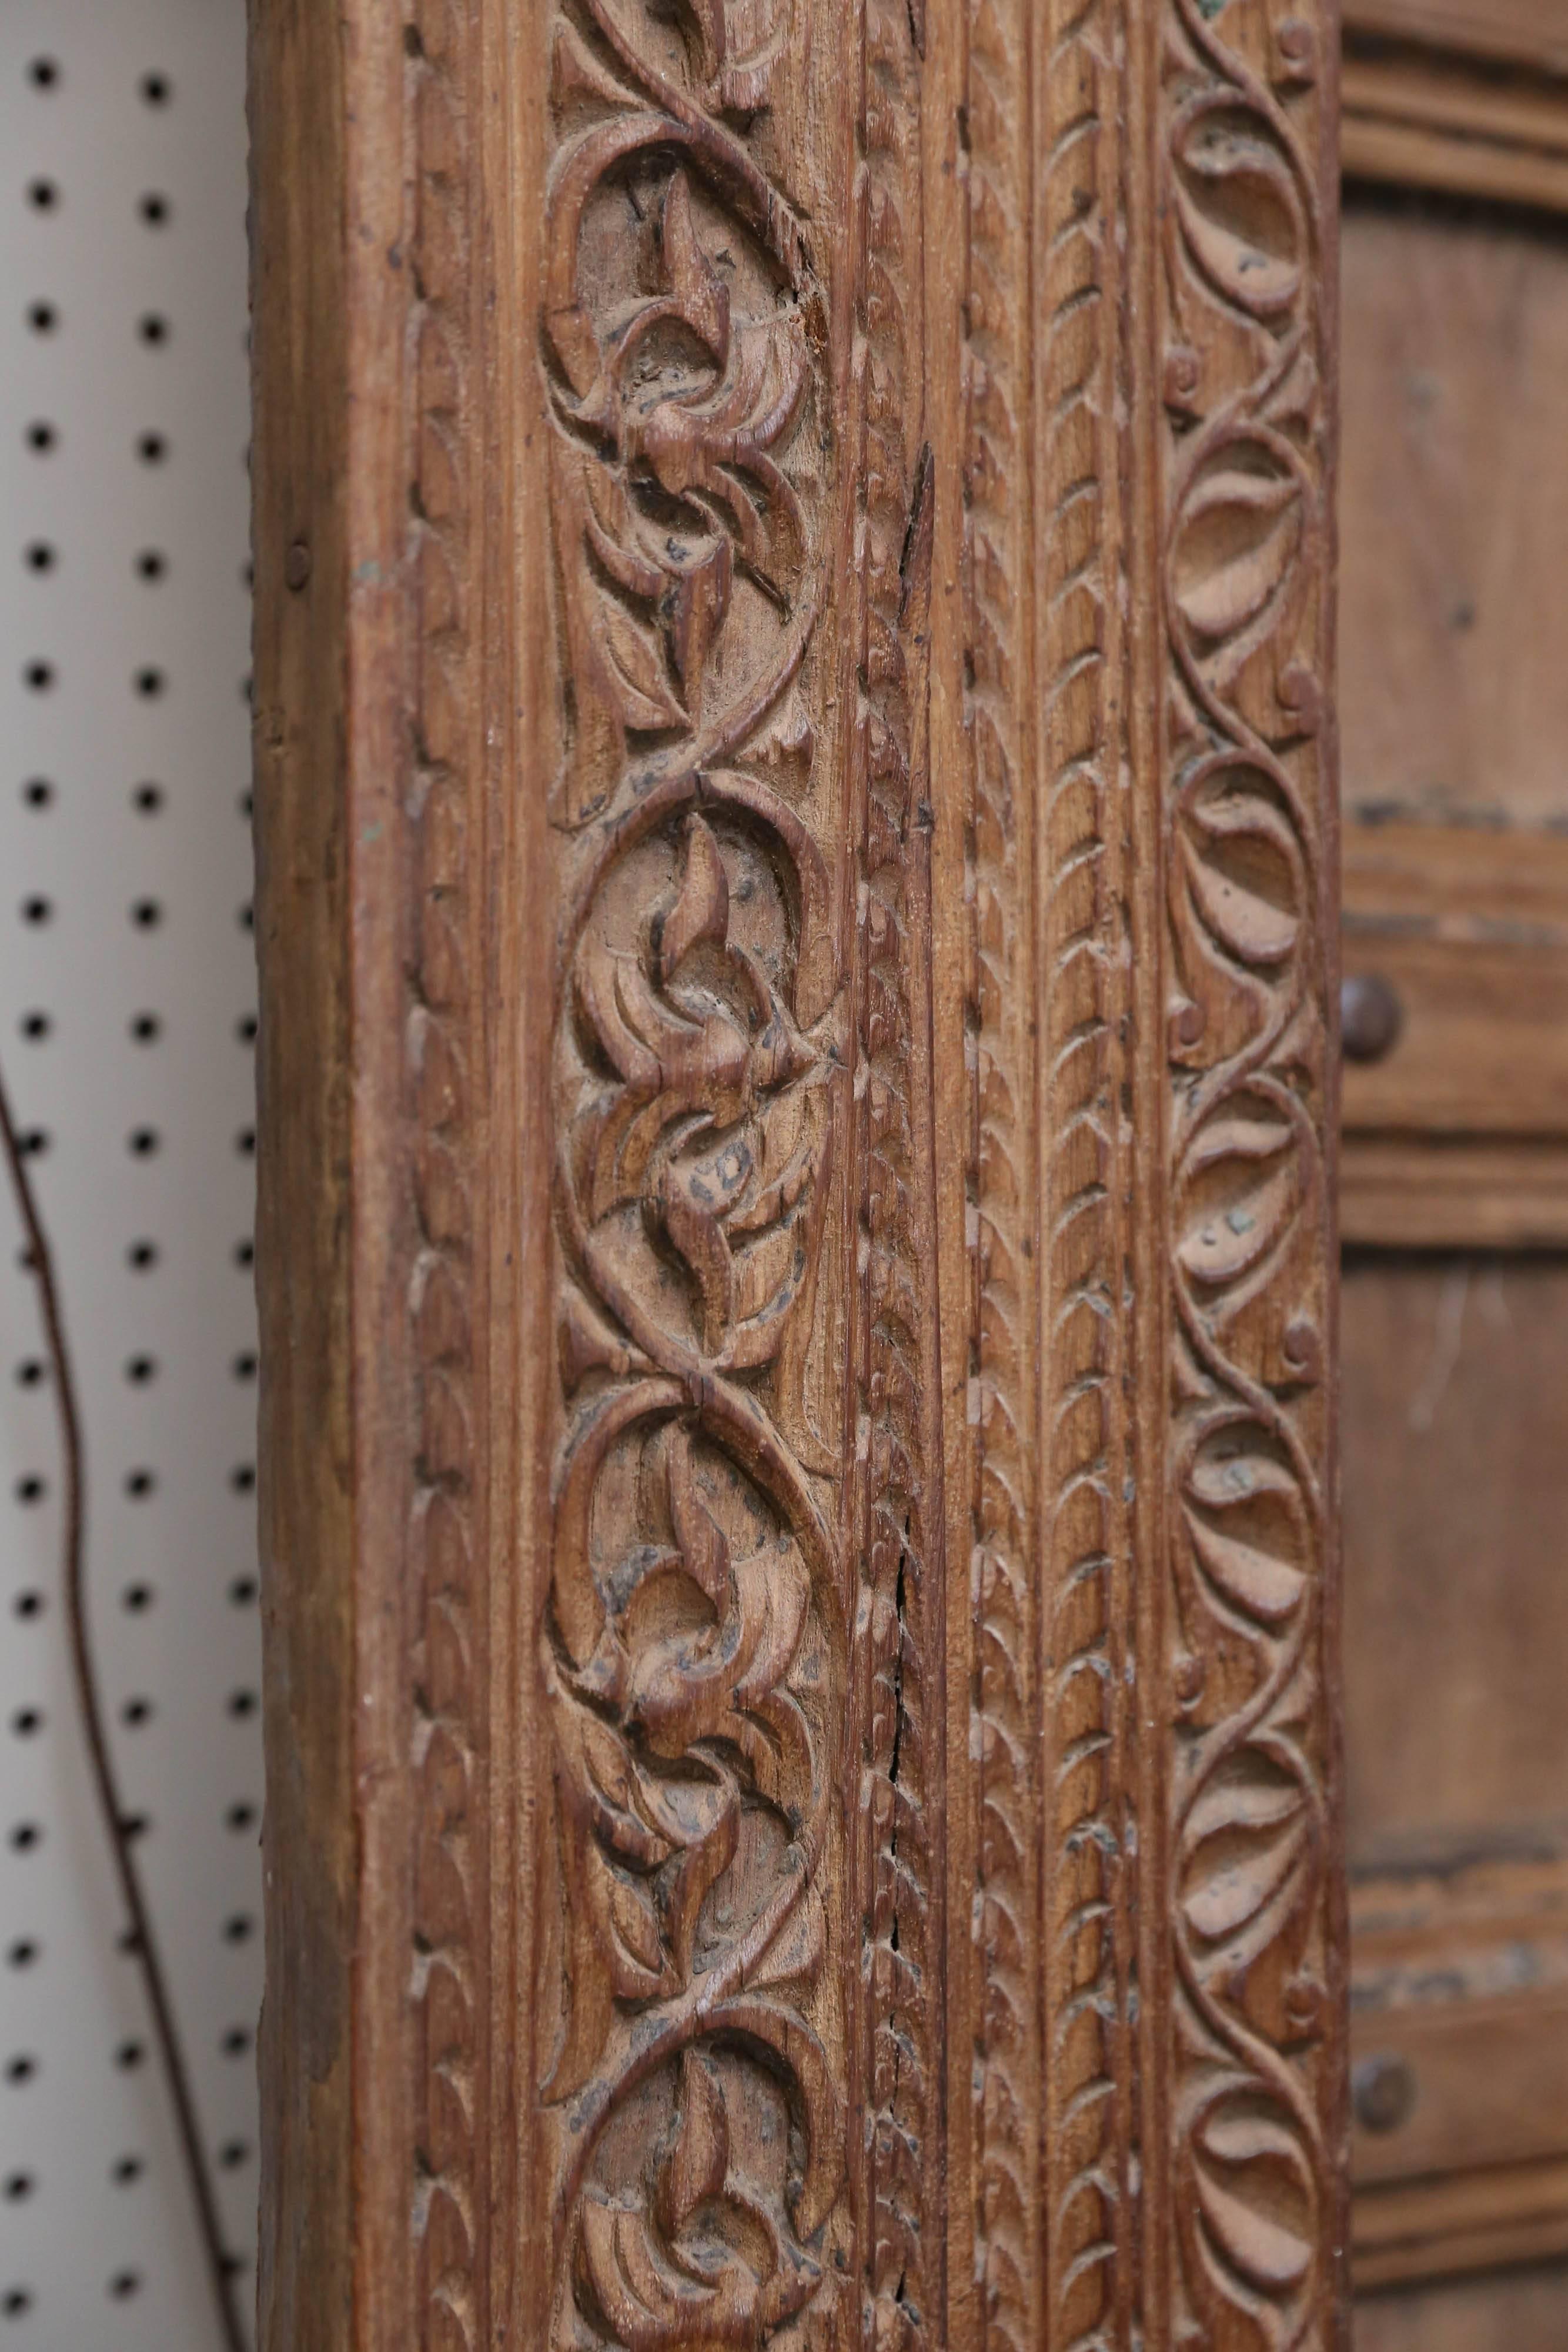 19th Century 1820s Monumental Solid Teak Wood Entry Door from a Fortress For Sale